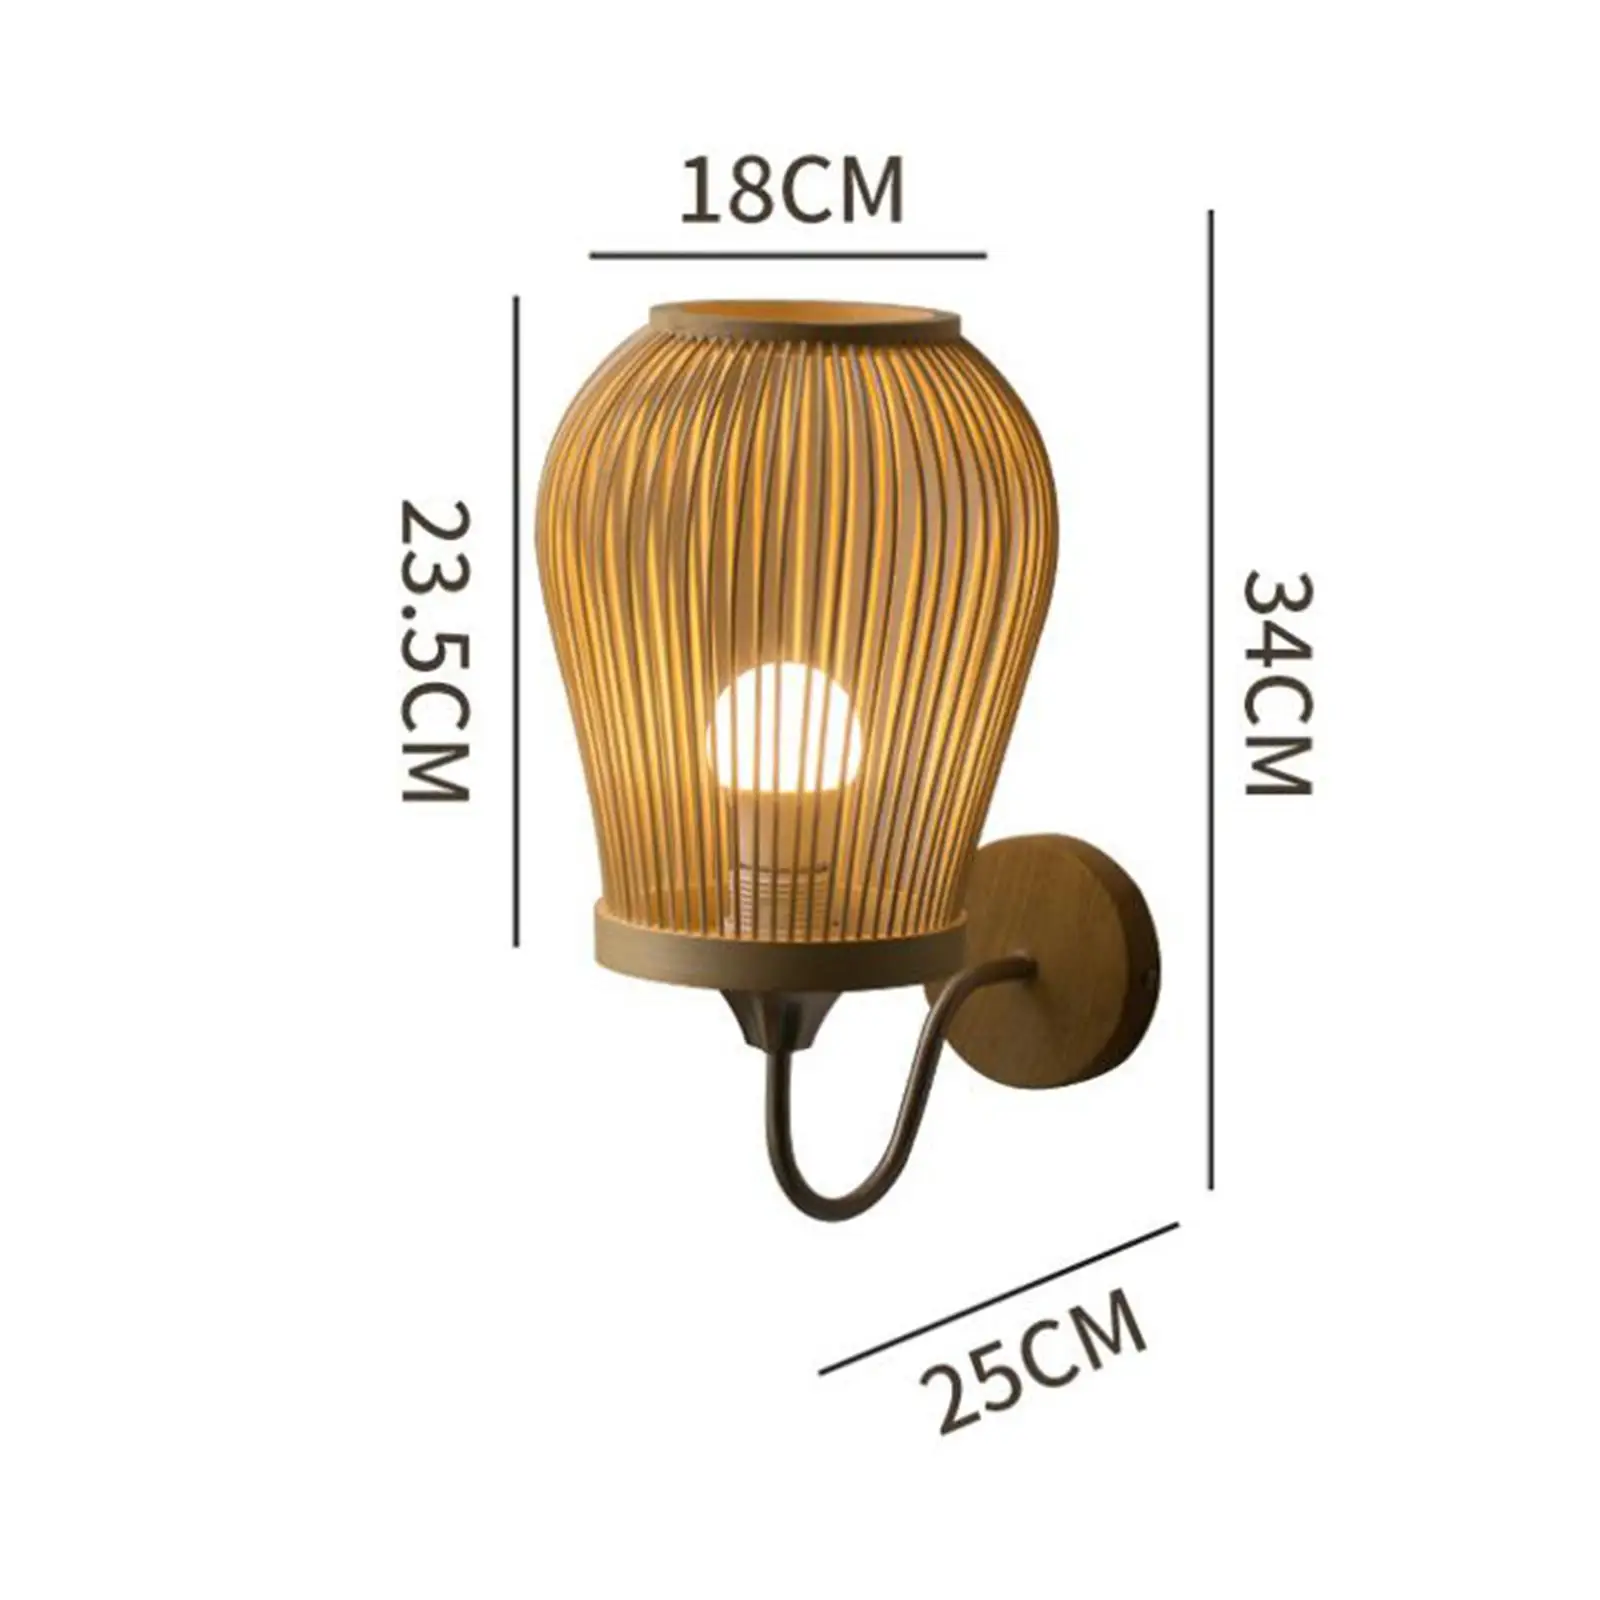 Bamboo Wall Sconce Lamp Light Lighting Retro Style Farmhouse E27 Base Decorative for Cafe Bedside Indoor Kitchen Decoration